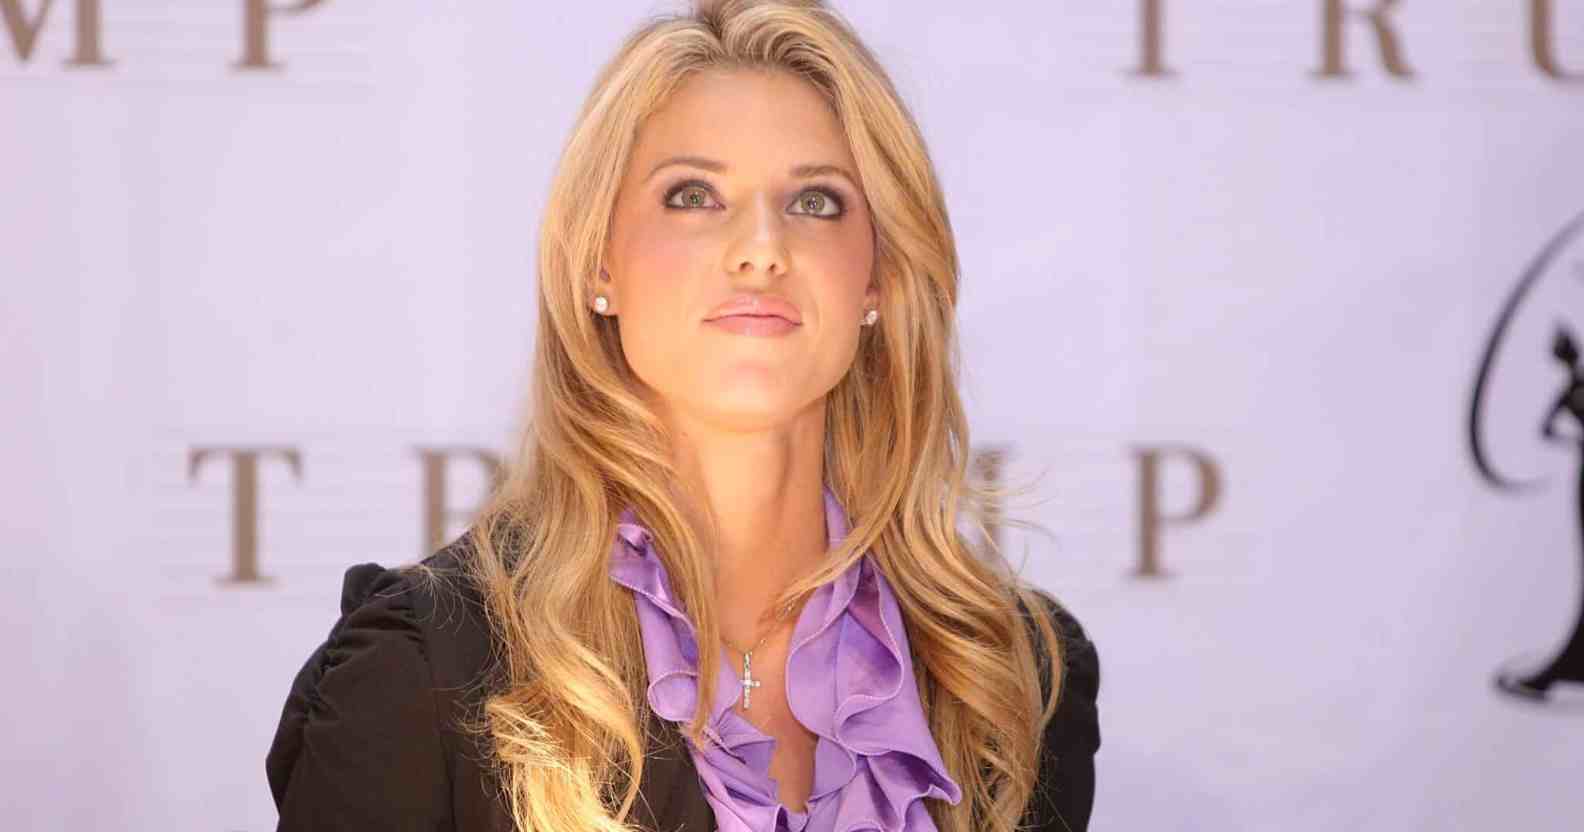 Carrie Prejean attends a press conference at Trump Tower on May 12, 2009 in New York City.